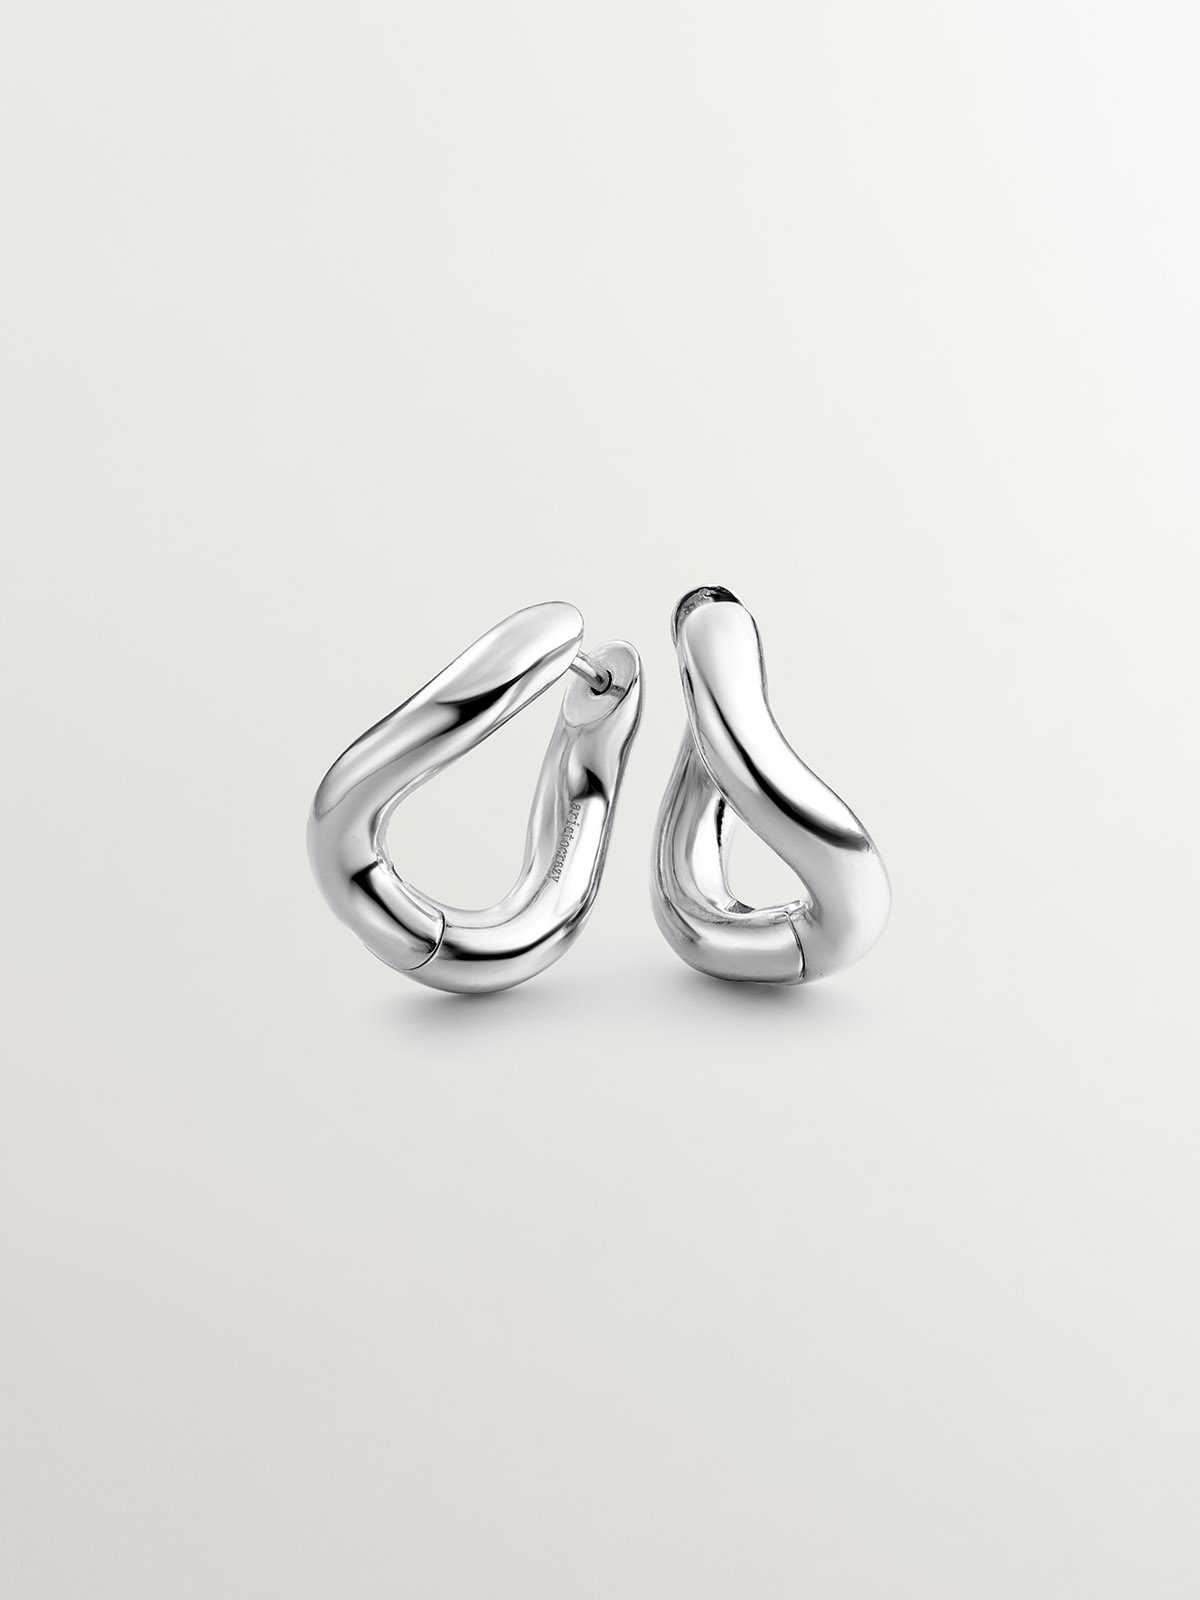 Medium thick 925 silver hoop earrings with a wavy shape.